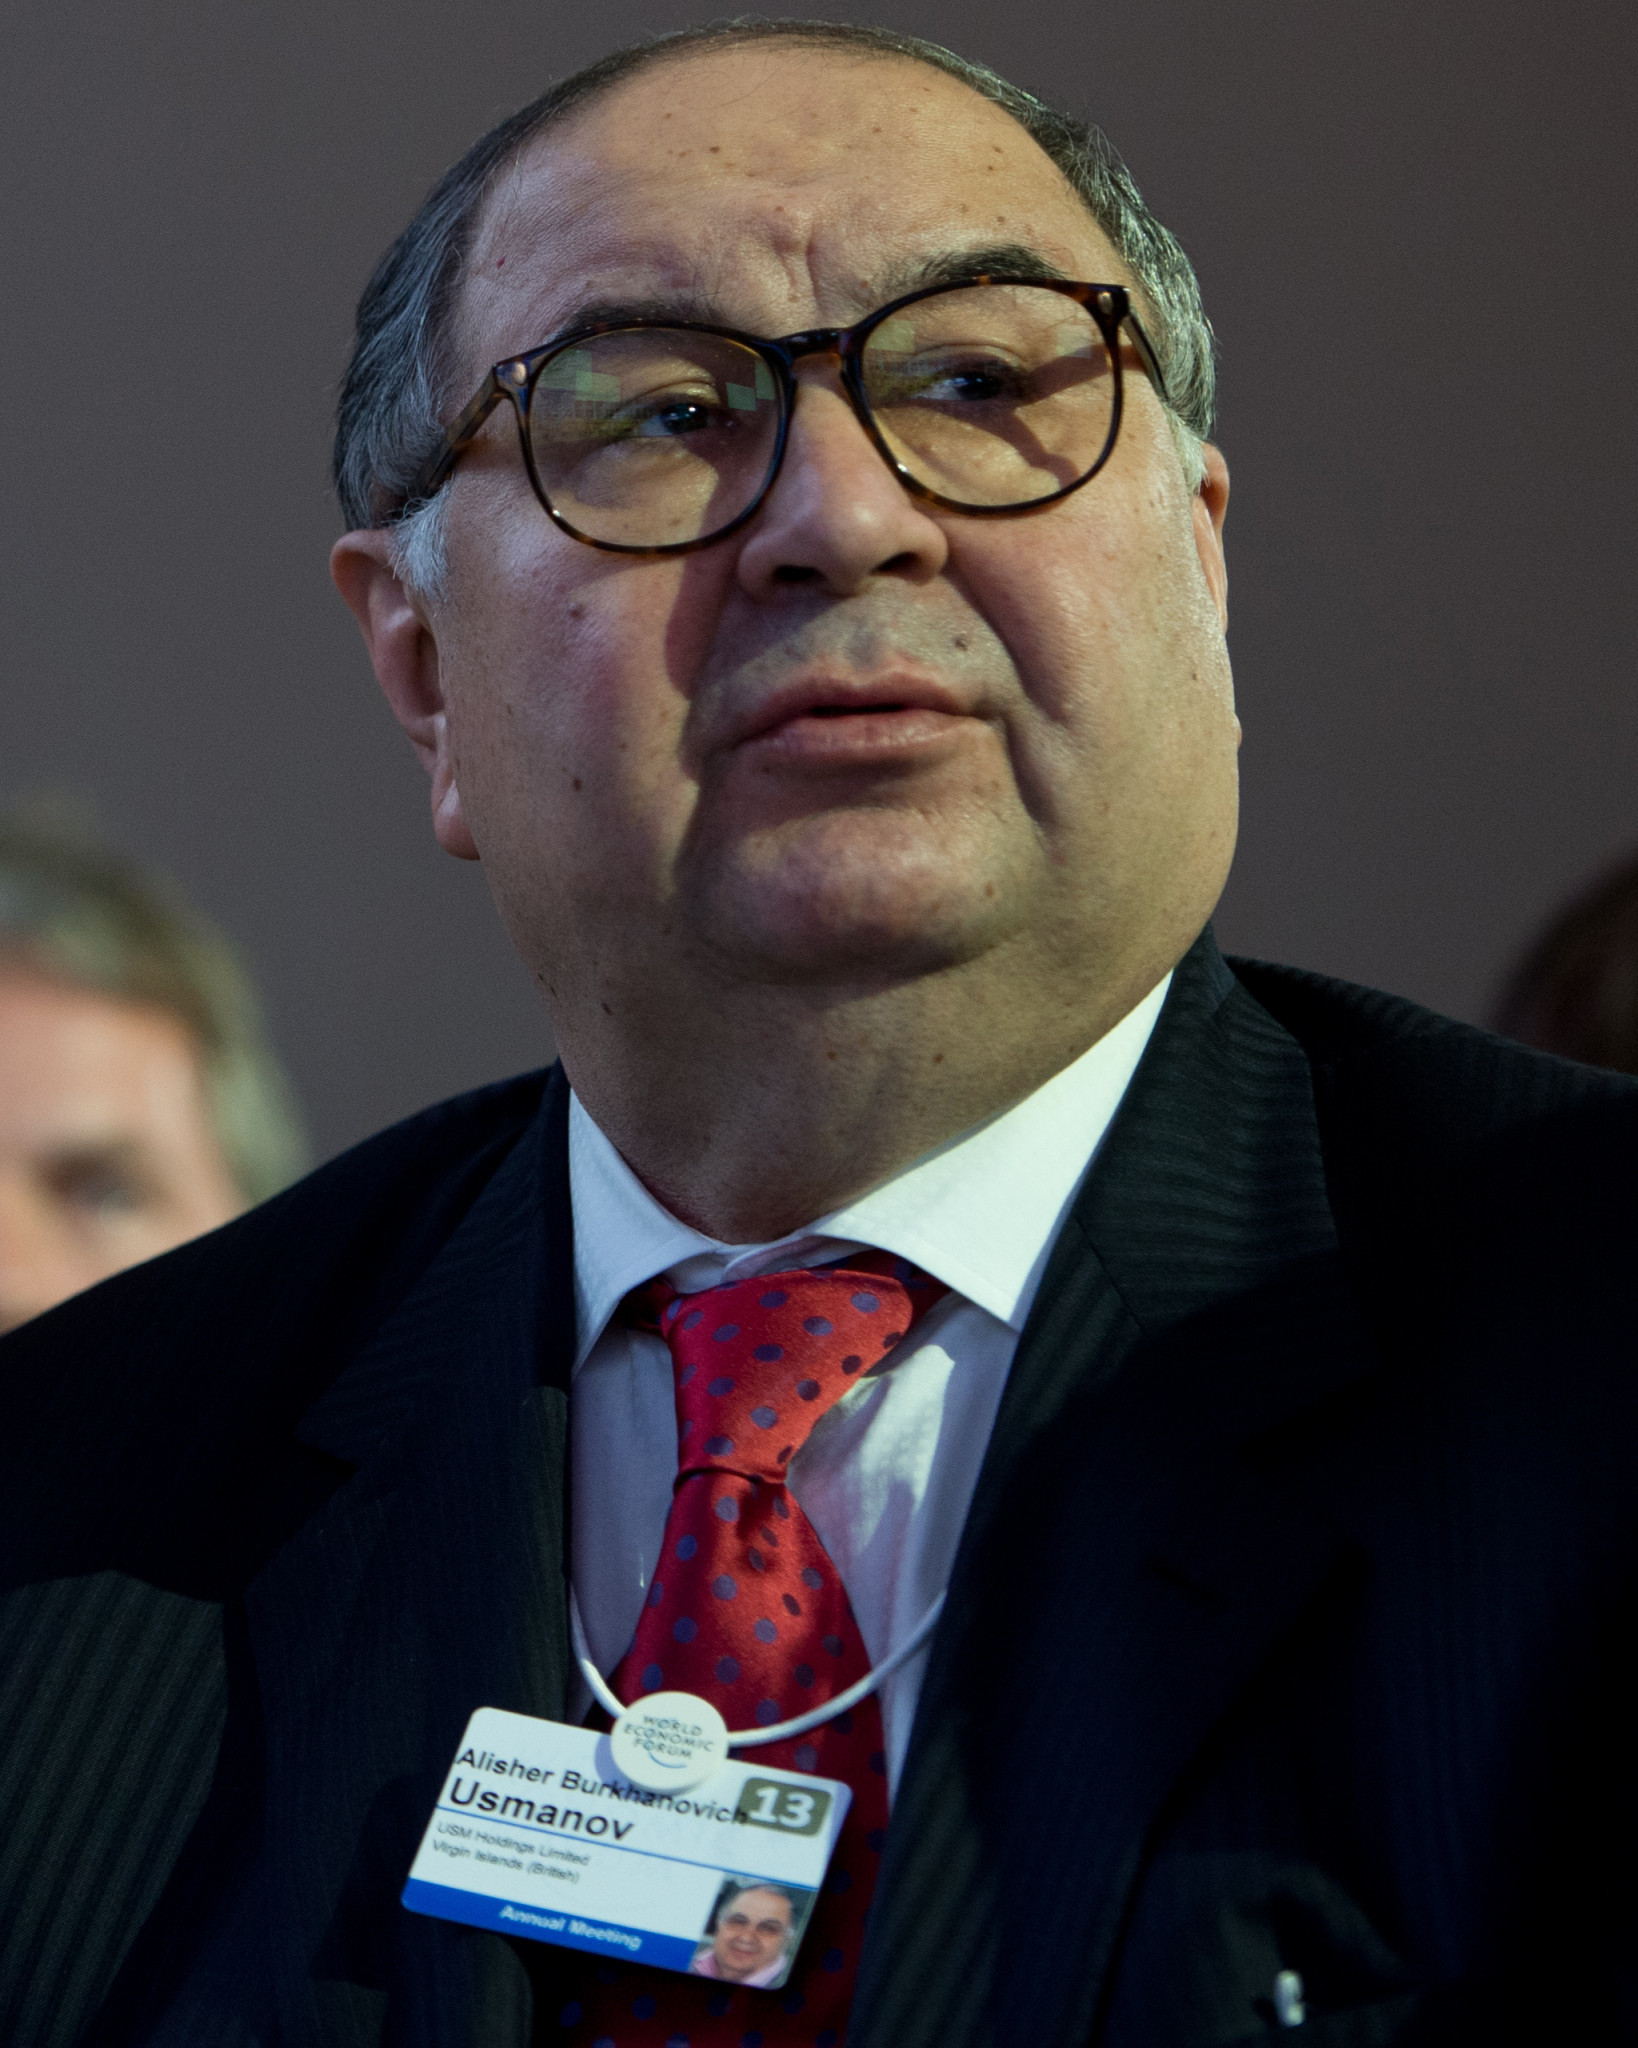 Alisher Usmanov, who has been President of the FIE since 2008, has been granted a year's extension after the Elective Congress was postponed due to coronavirus ©Getty Images